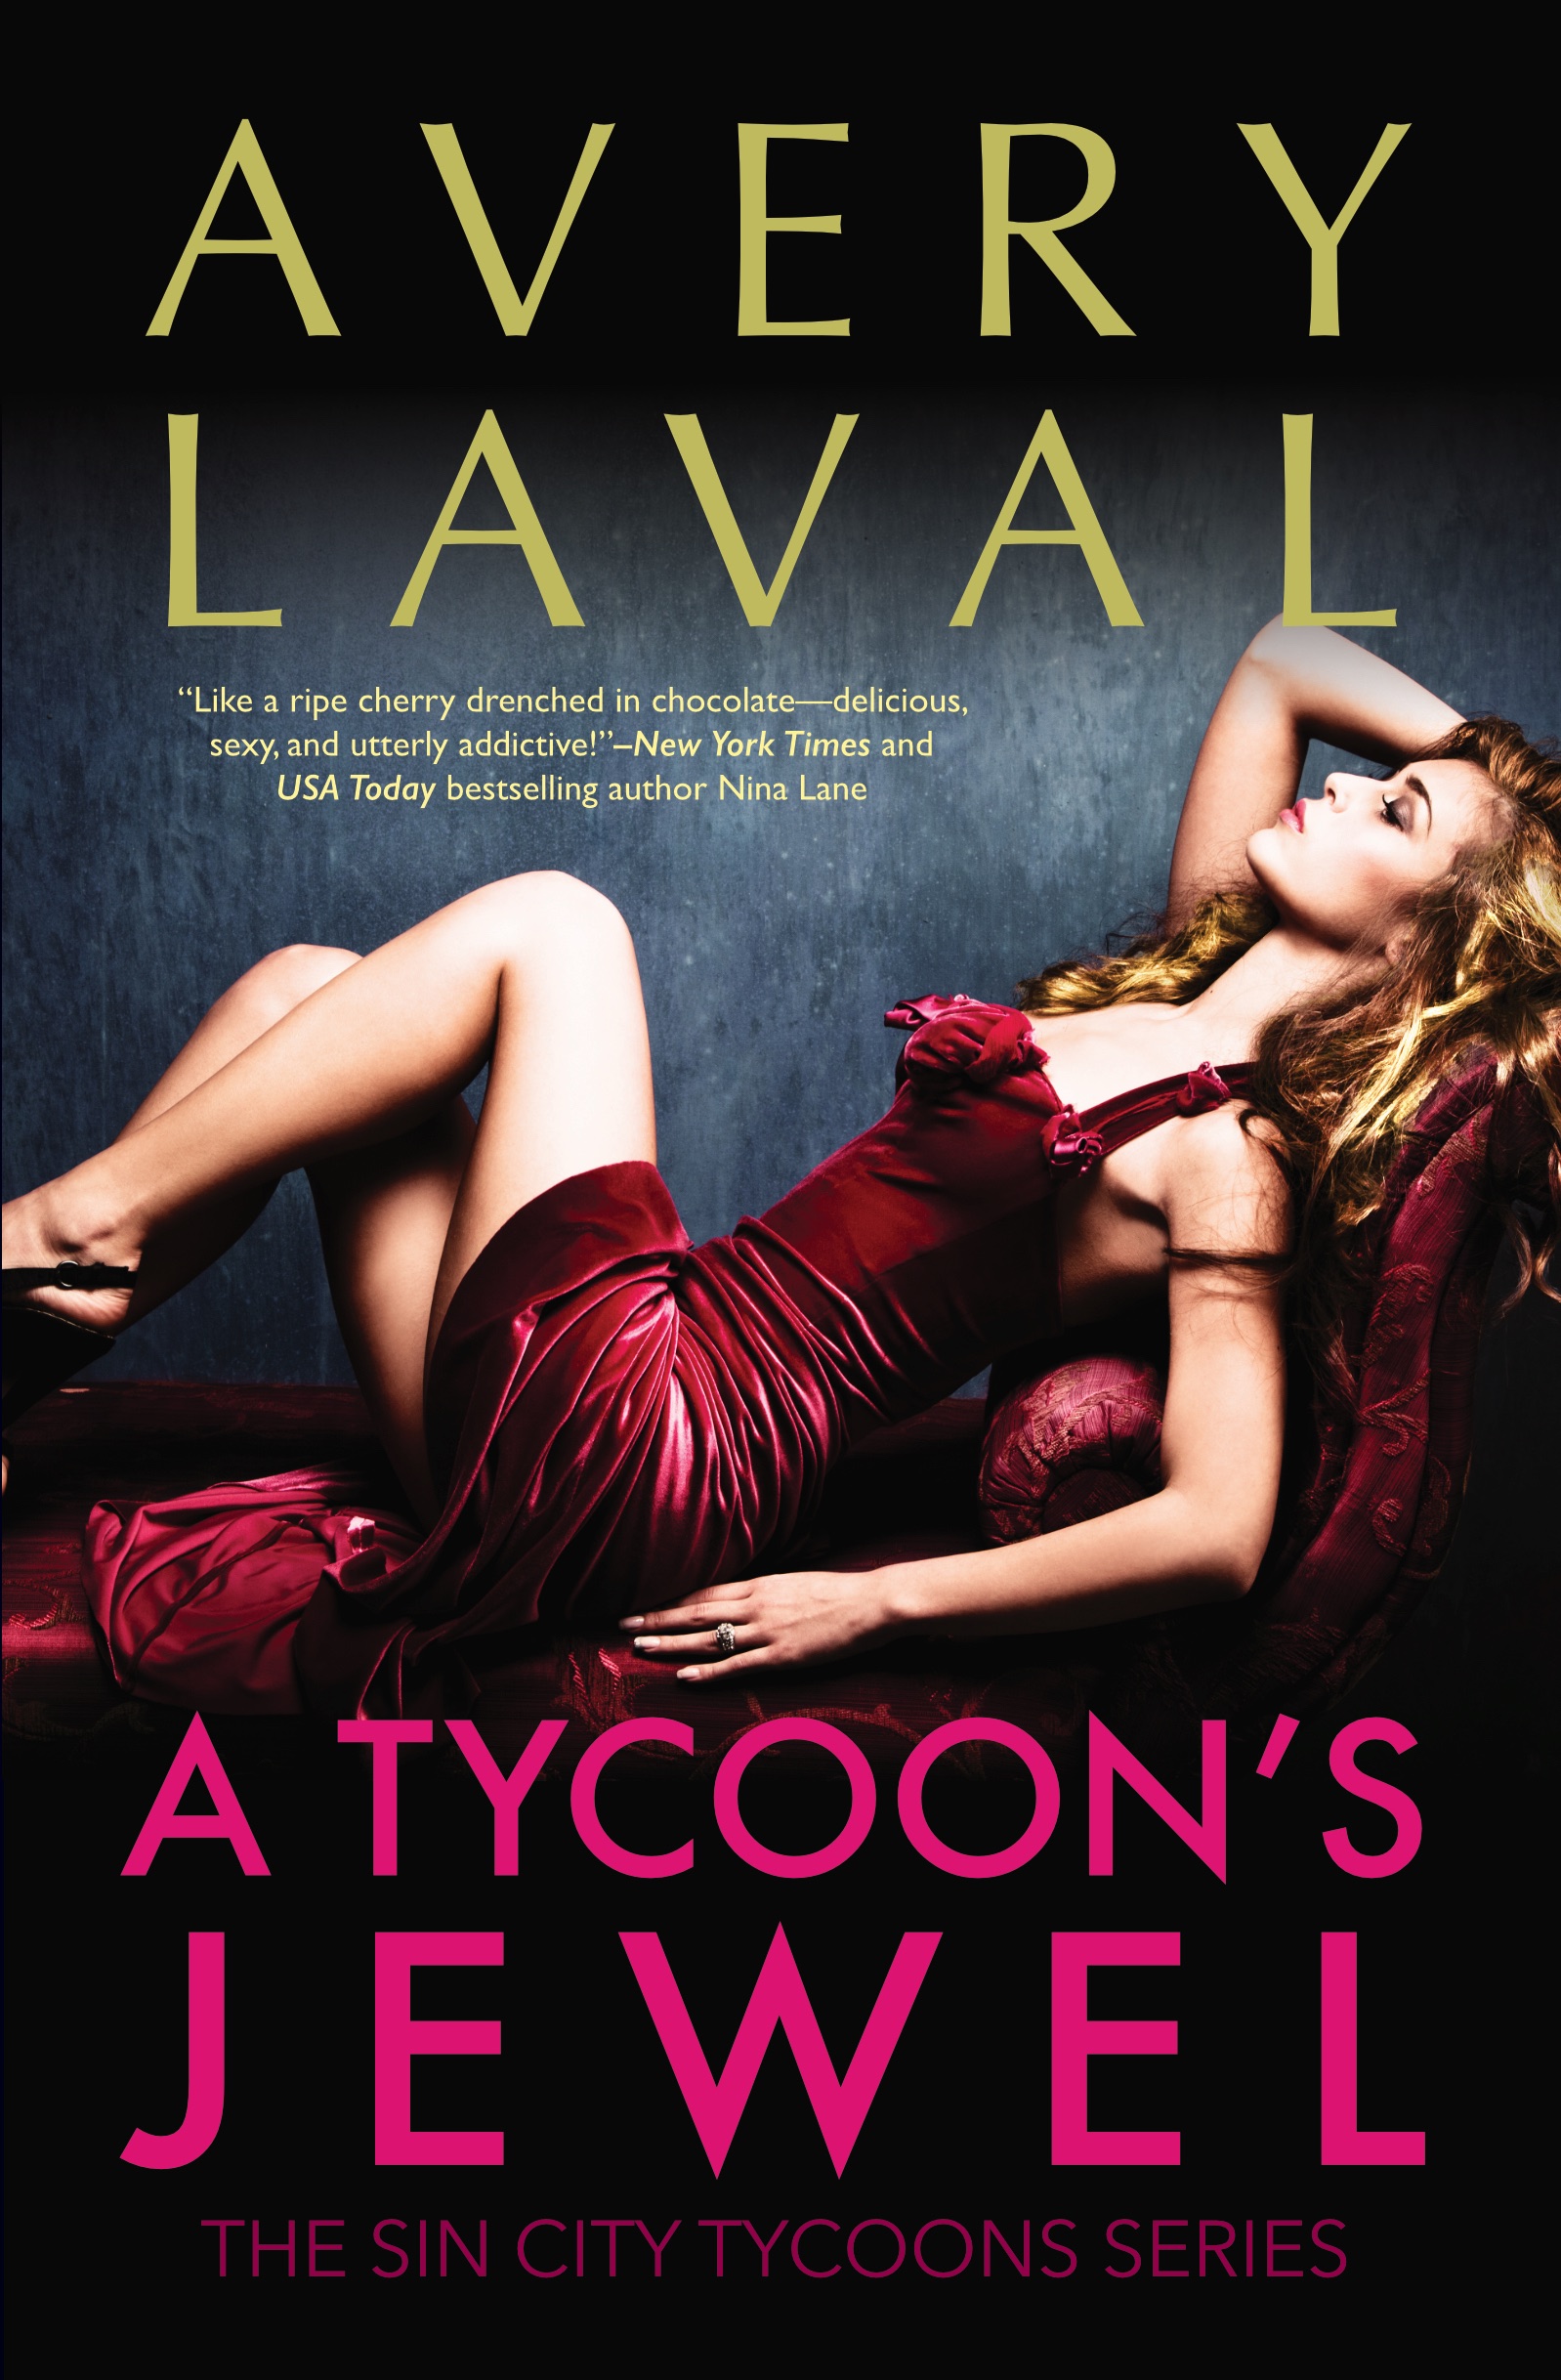 FREE: A TYCOON’S JEWEL by Avery Laval